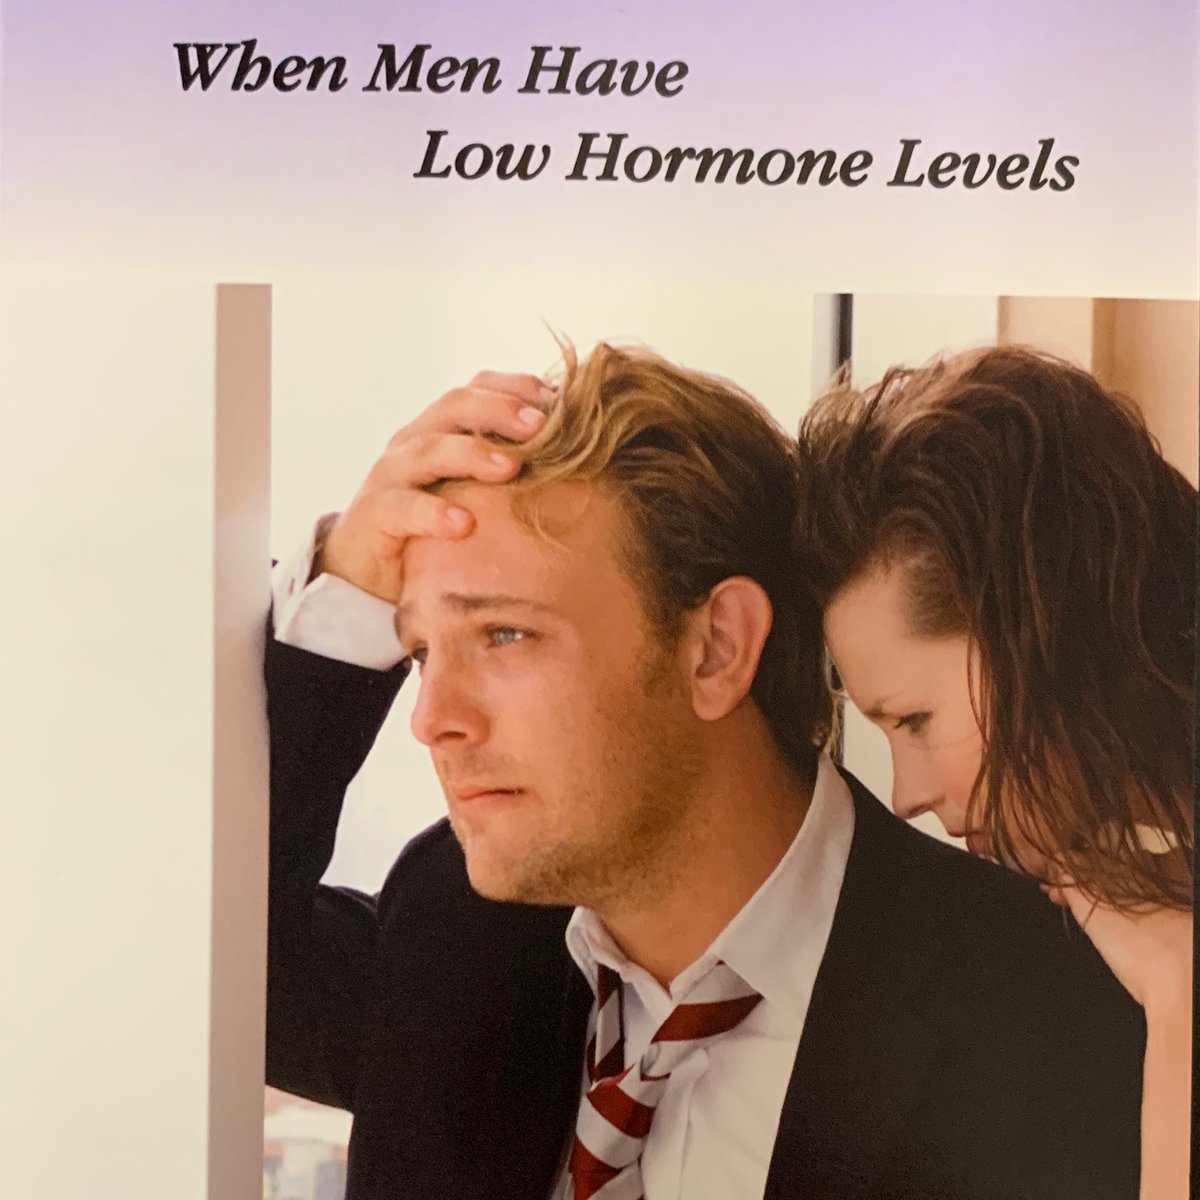 No motivation? Sick and tired of feeling sick and tired? Can’t get it up? #lowtestosterone #testosteronedeficiency Schedule your evaluation @khwclinic 281-852-1800